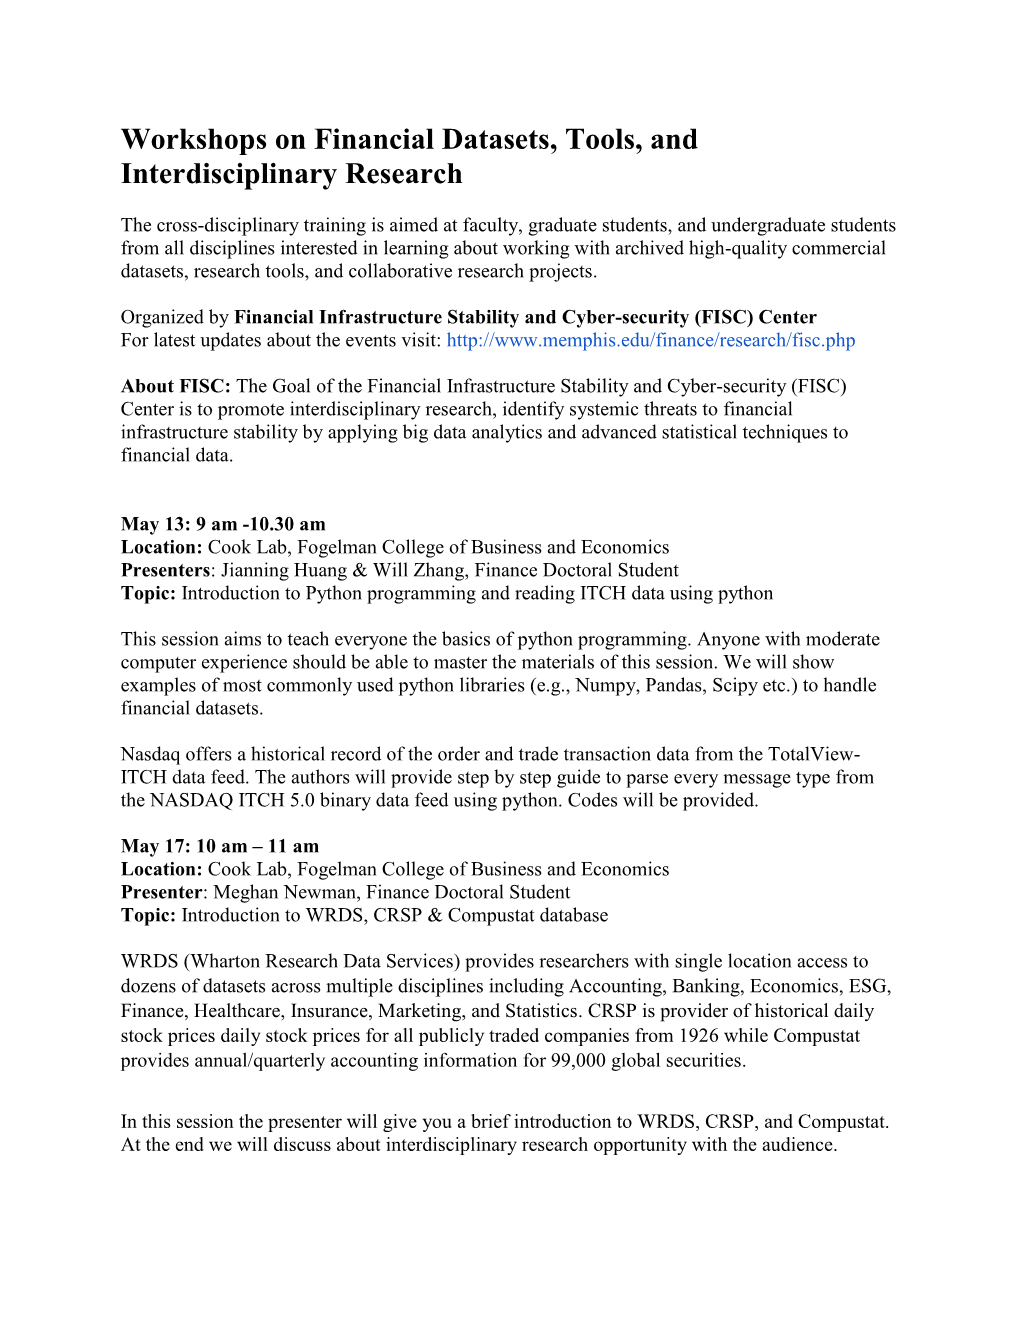 Workshops on Financial Datasets, Tools, and Interdisciplinary Research